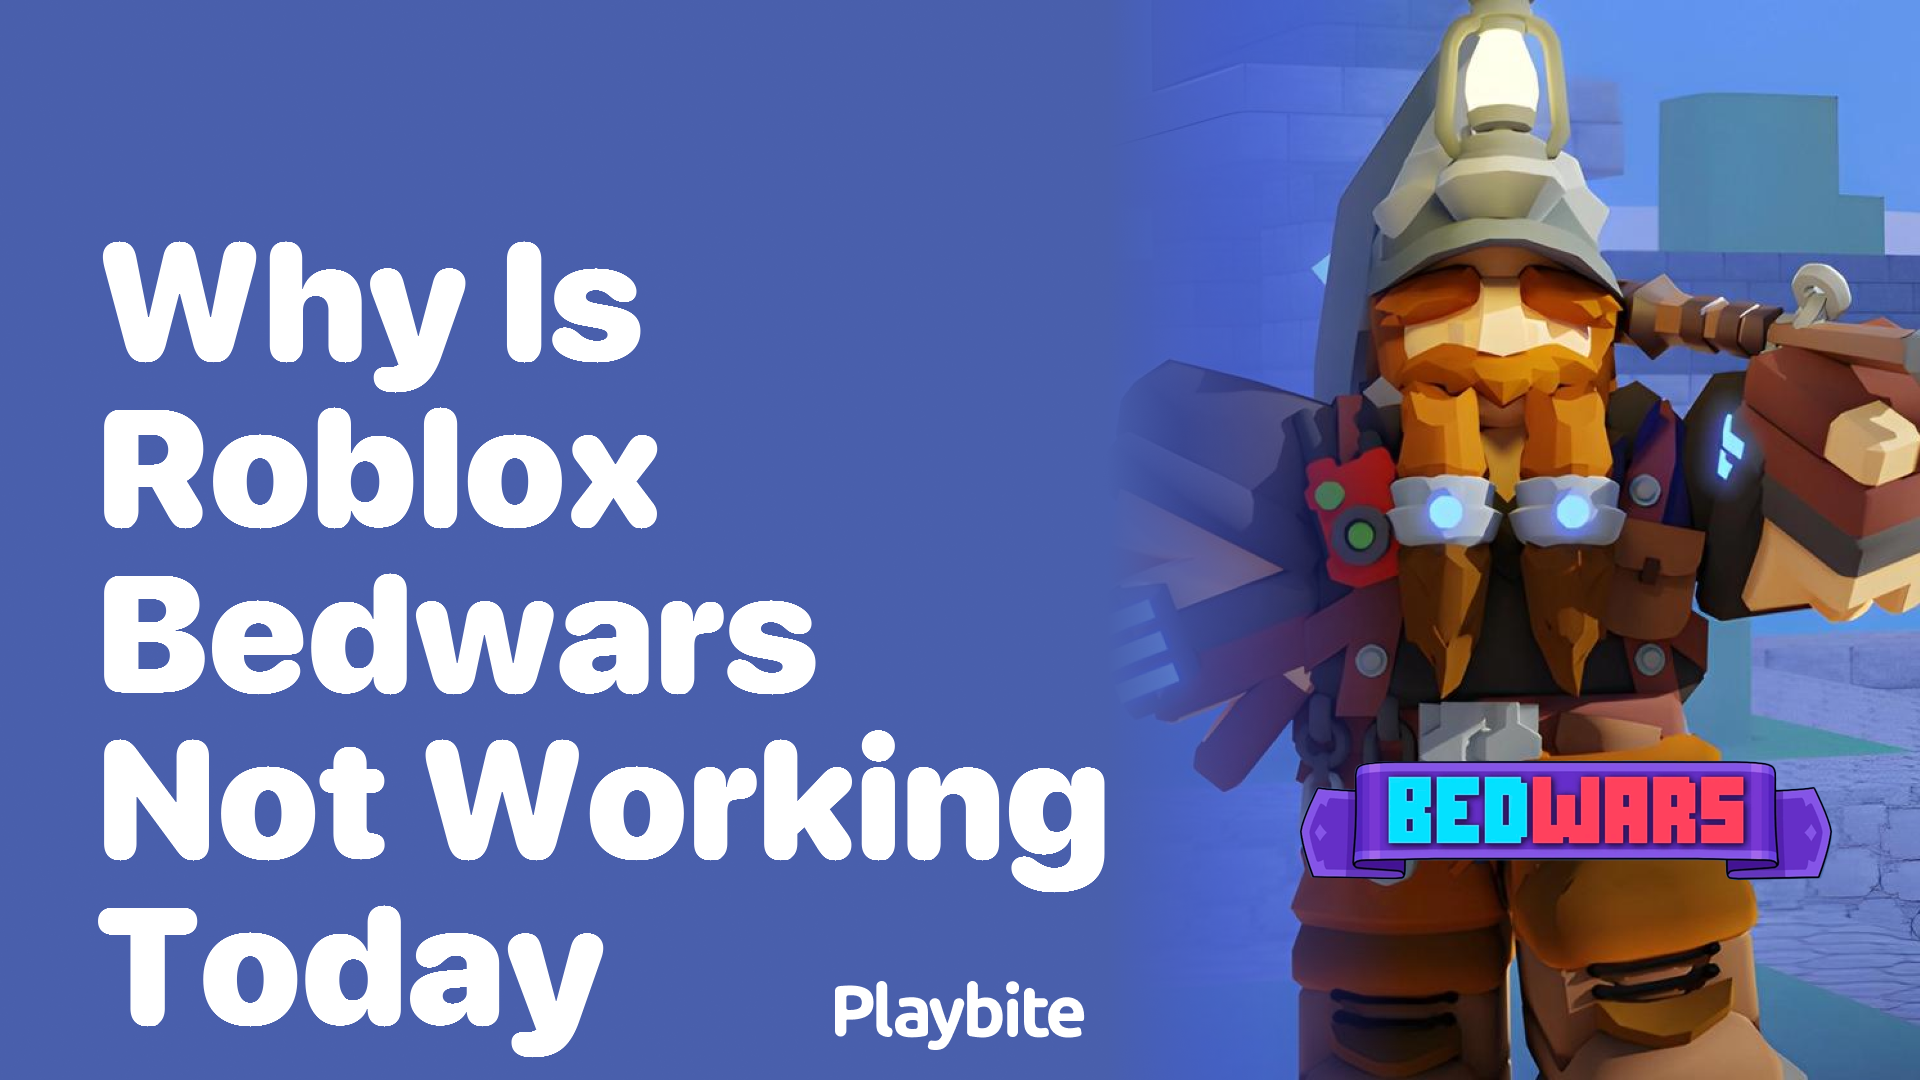 Why Is Roblox Bedwars Not Working Today?